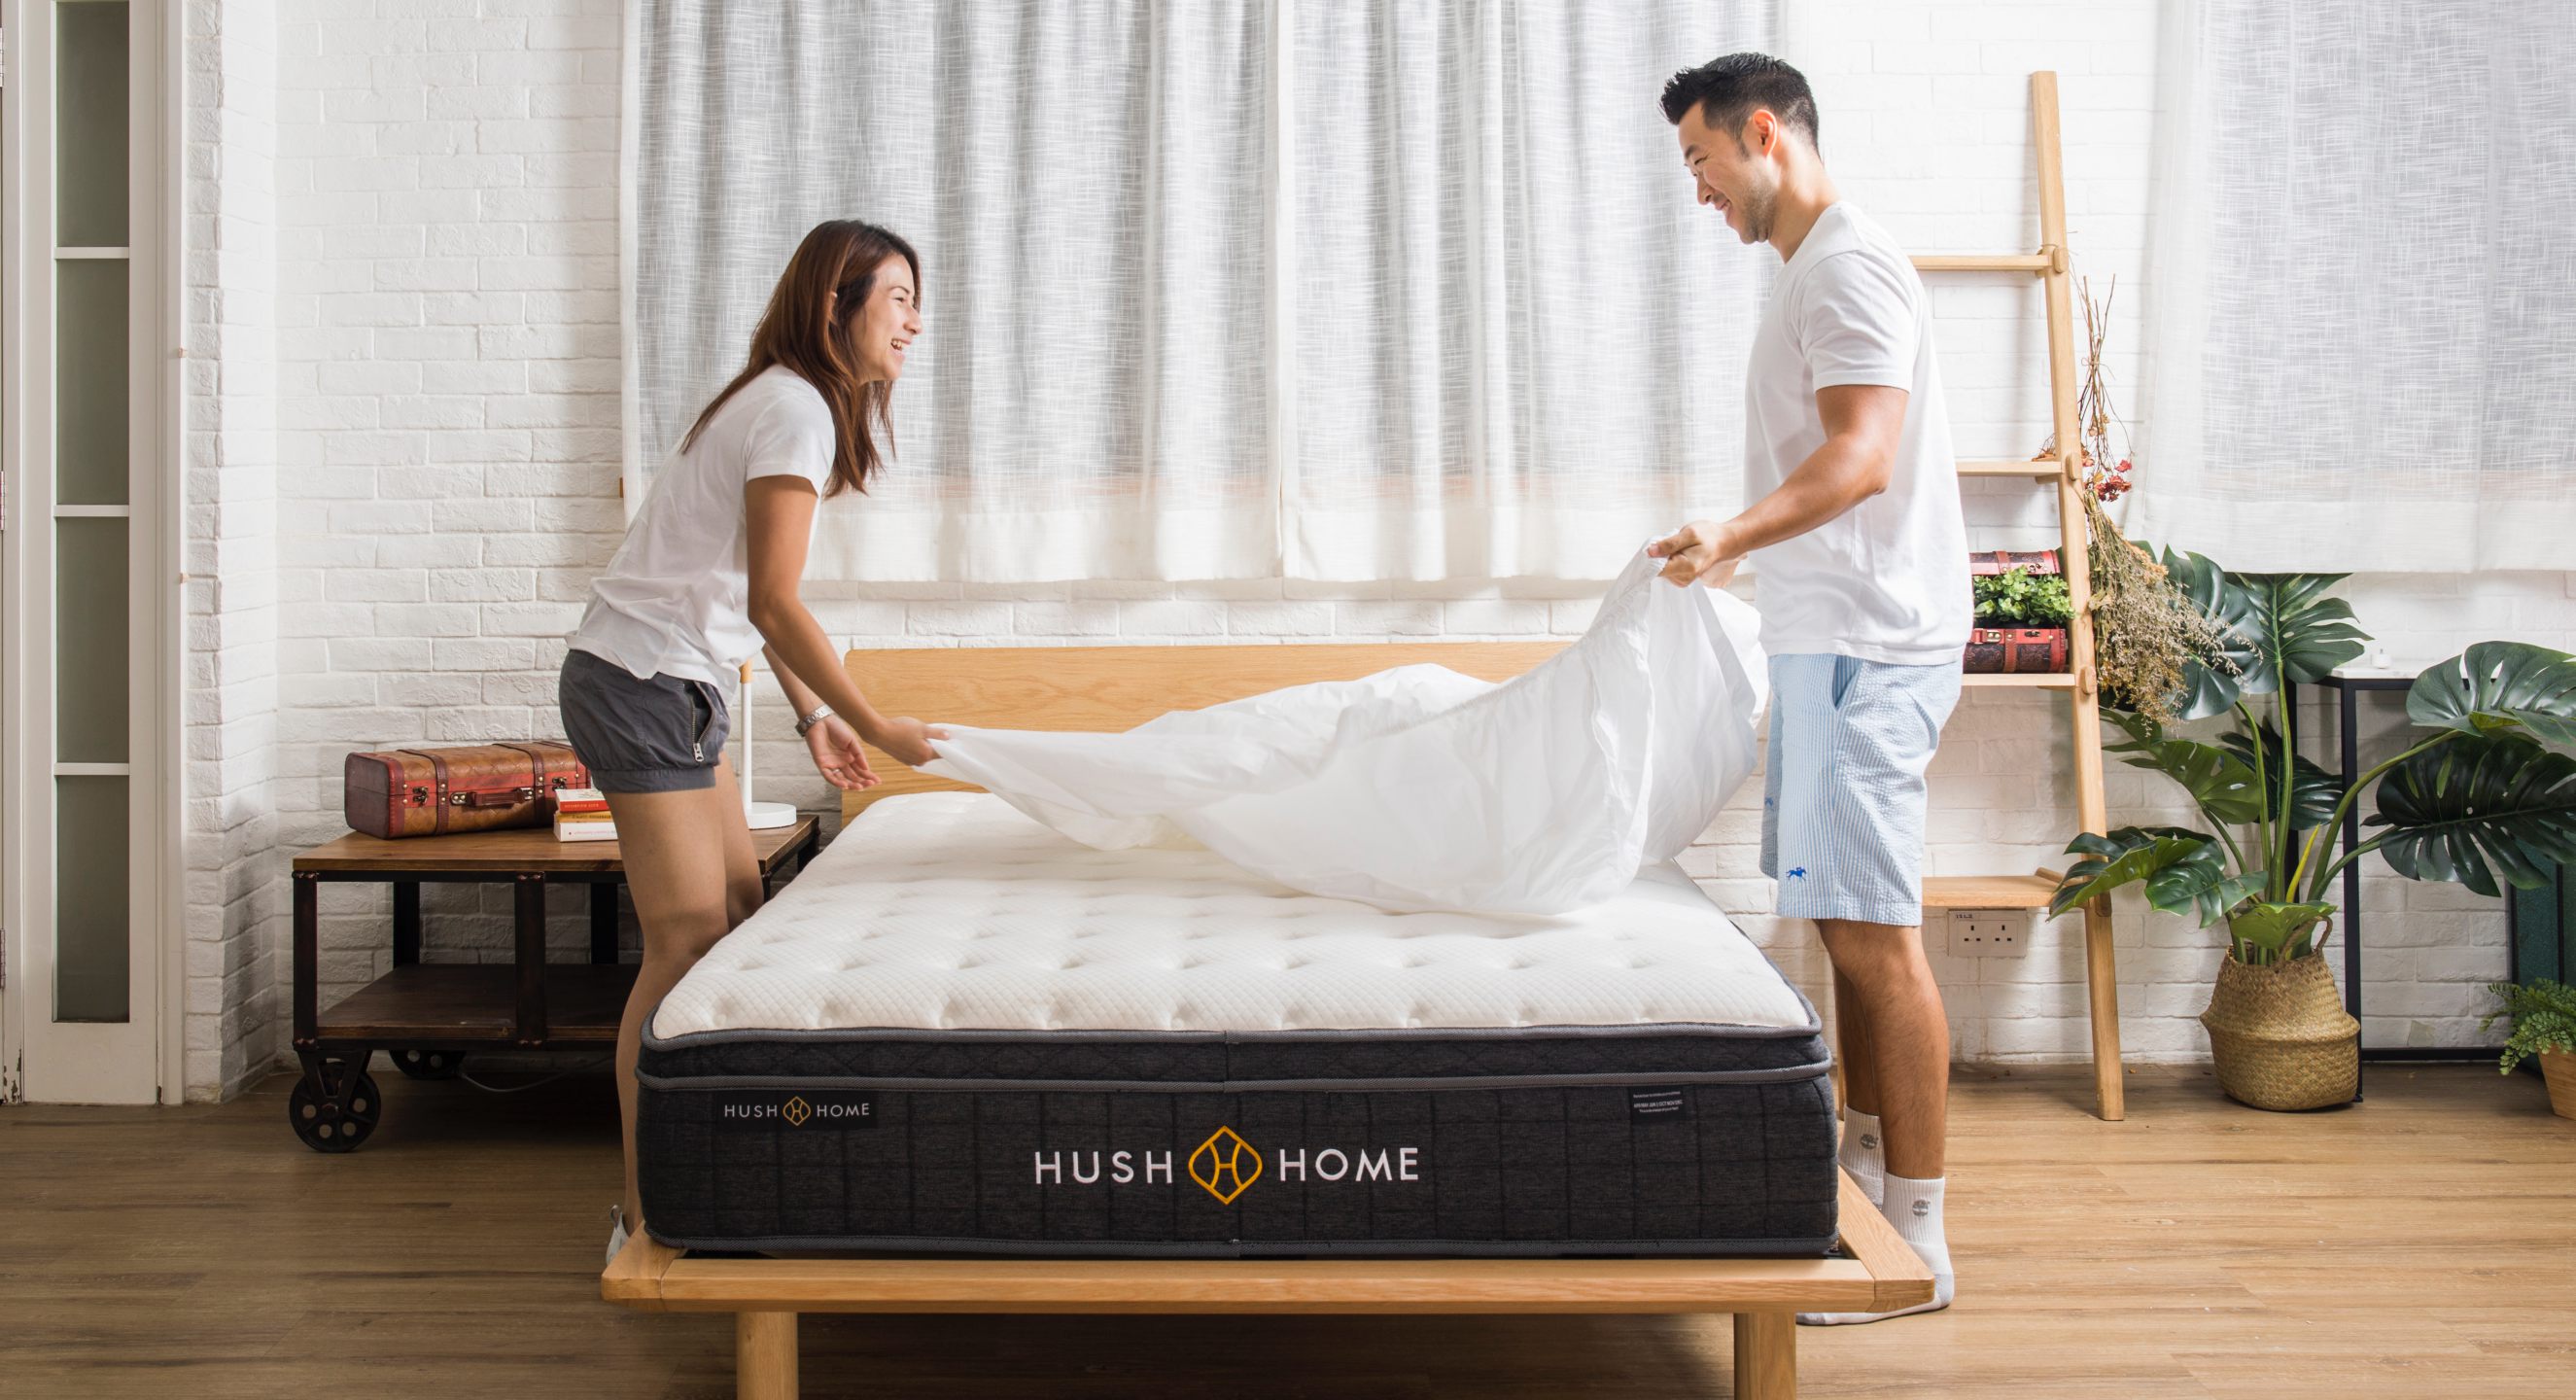 This Hong Kong mattress company is helping to detox homes ahead of Chinese New Year